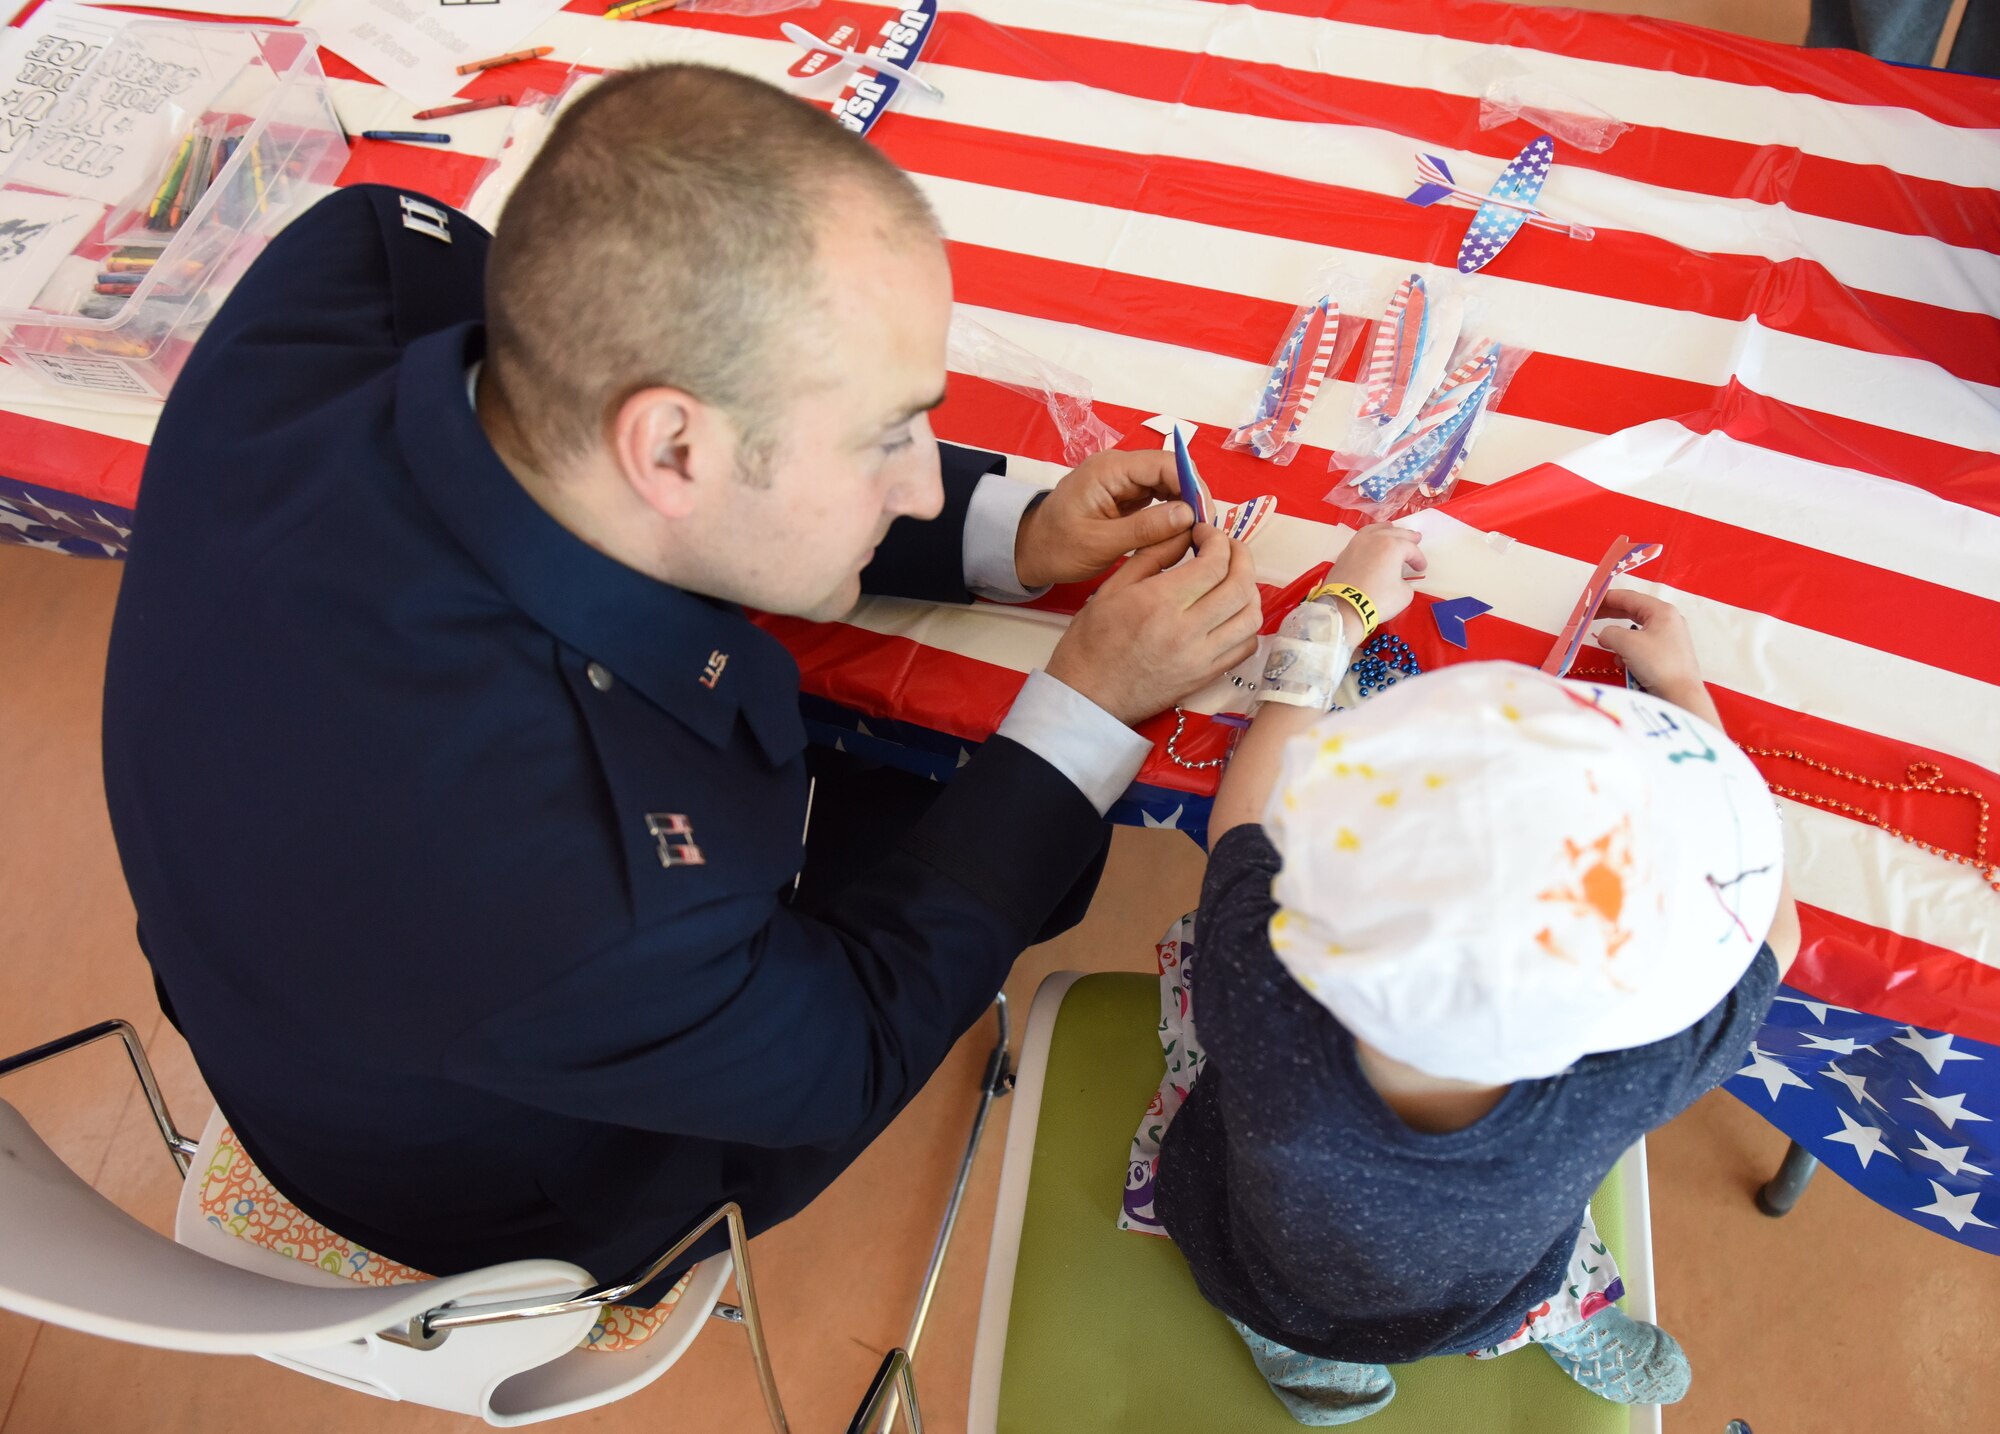 Capt. Justin Lewis, public affairs officer assigned to Secretary of the Air Force Public Affairs, interacts with a patient at Children’s Hospital of Pittsburgh, June 14, 2019.